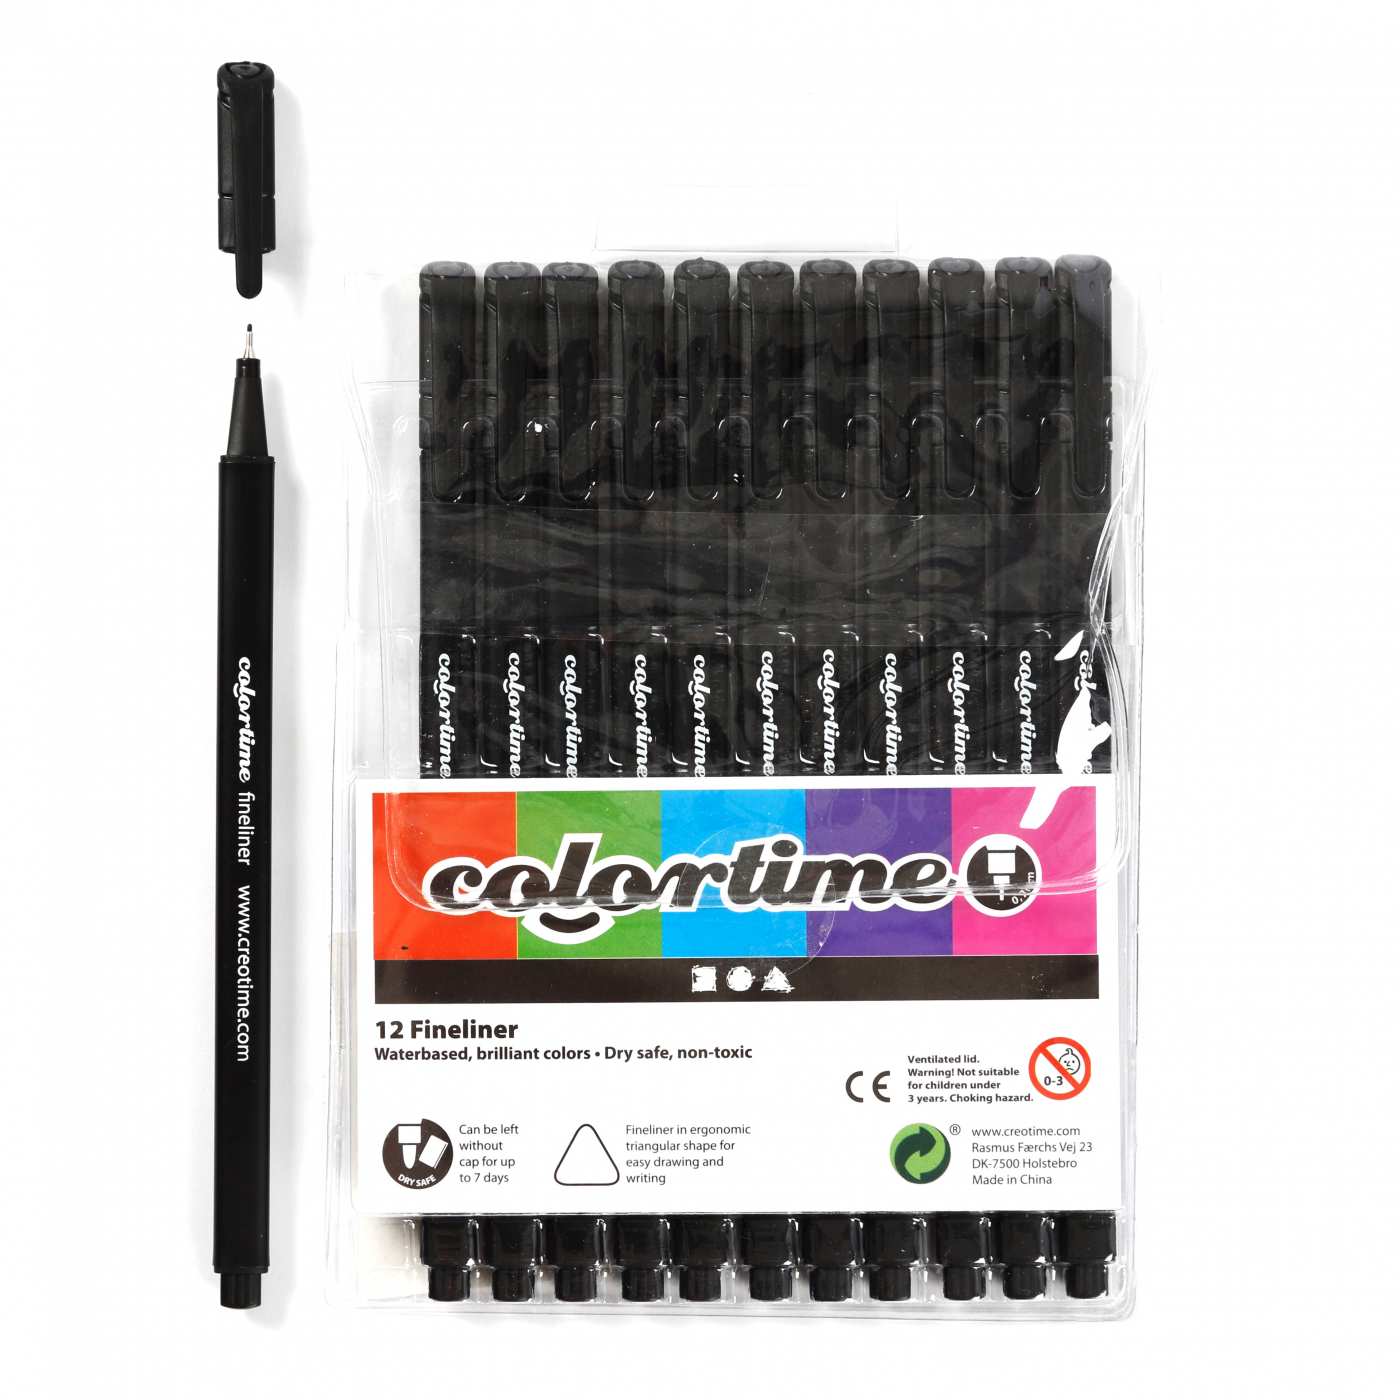 Fineliner Black 12-set in the group Pens / Writing / Fineliners at Voorcrea (111853)